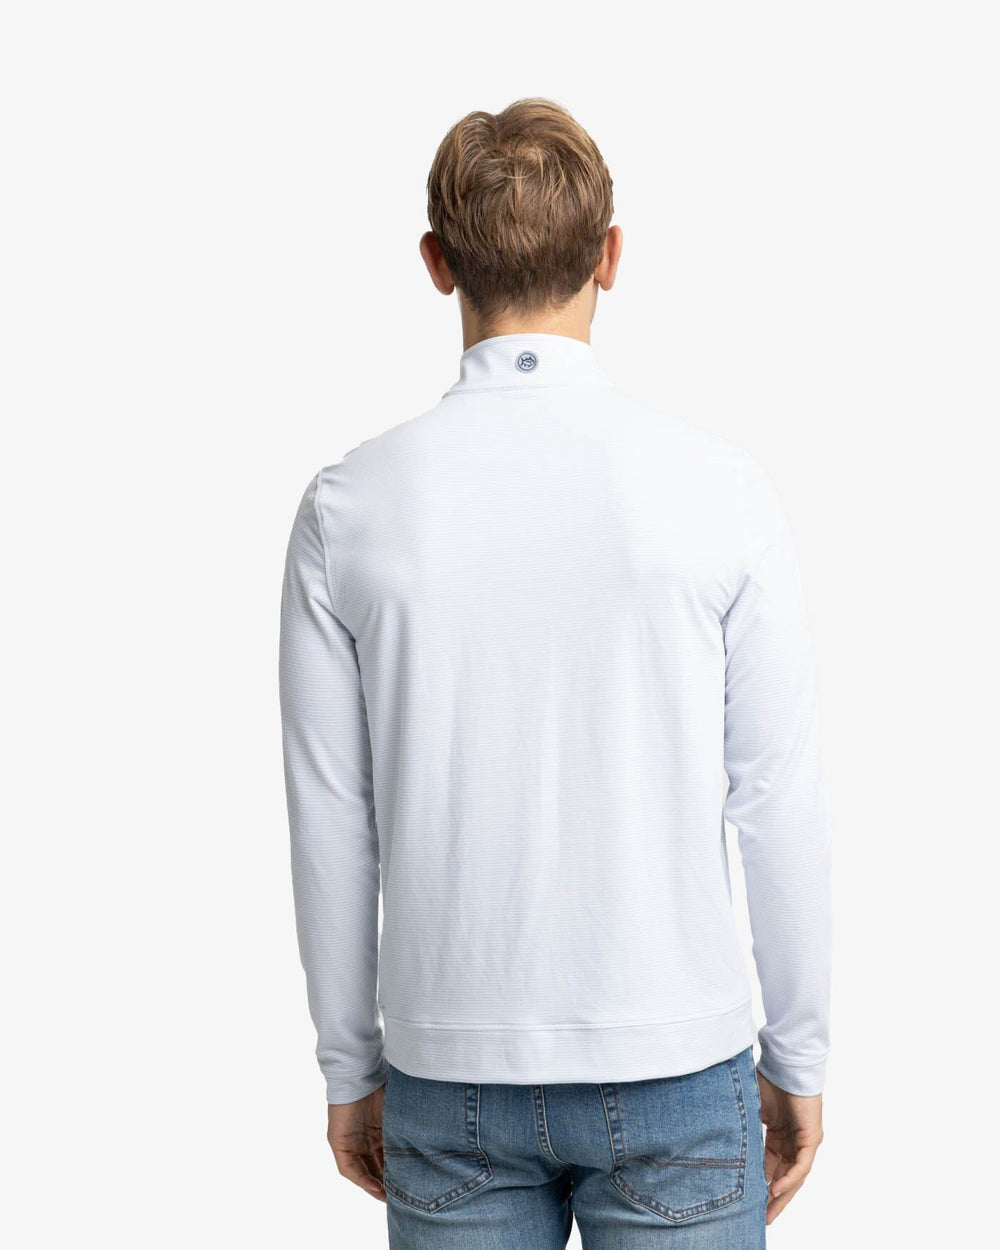 The back view of the Southern Tide Cruiser Micro-Stripe Heather Quarter Zip by Southern Tide - Heather Slate Grey